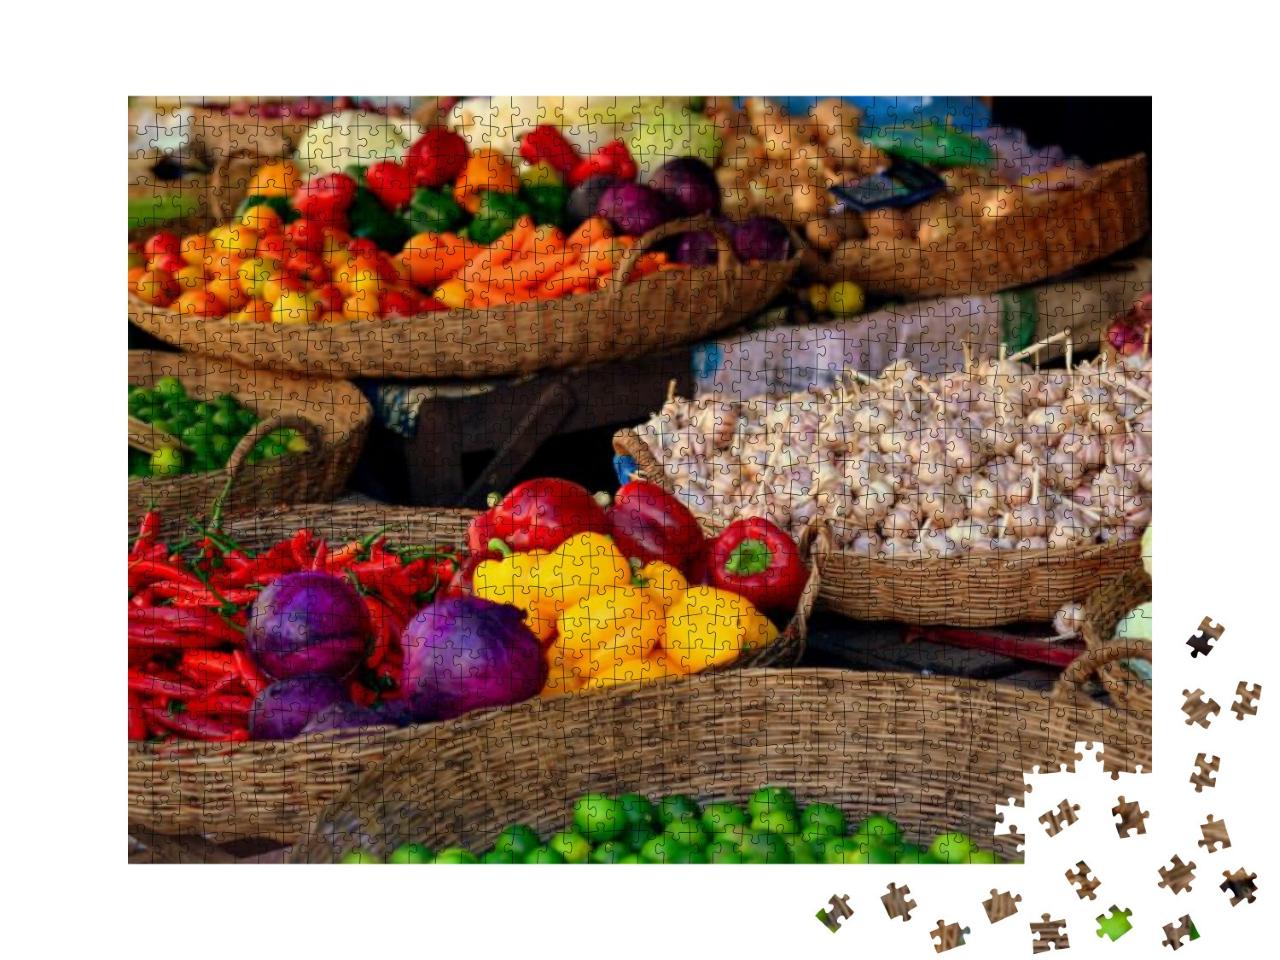 Vegetables on the Market in Siem Reap, Cambodia... Jigsaw Puzzle with 1000 pieces